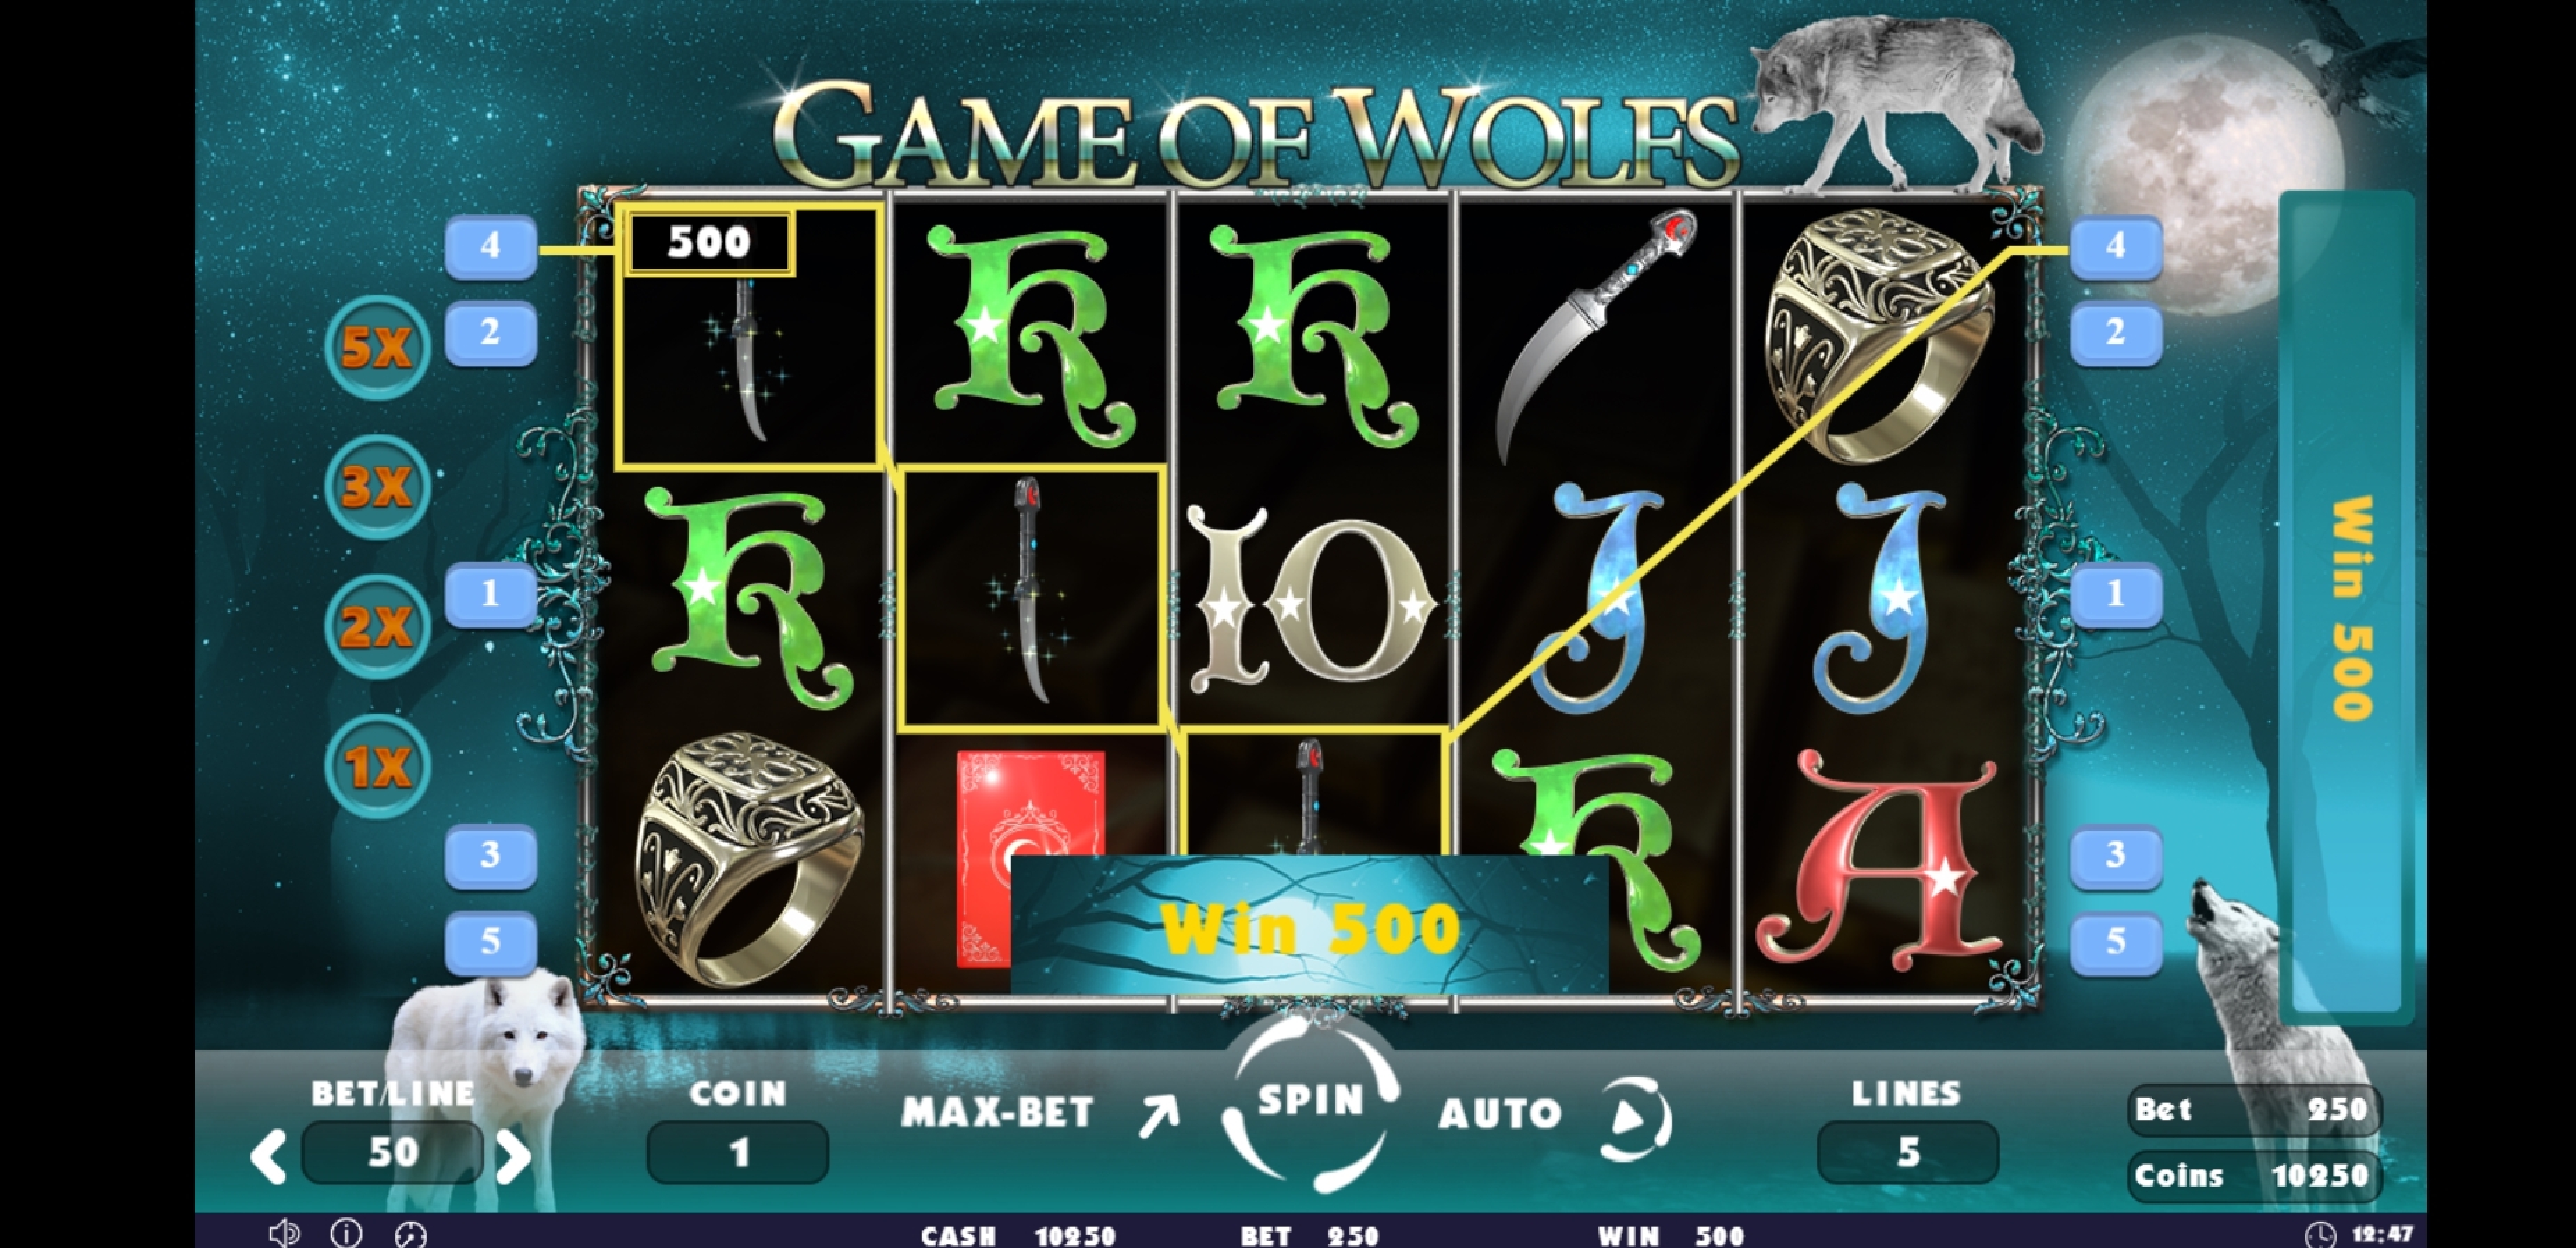 Win Money in Game of Wolfs Free Slot Game by Others